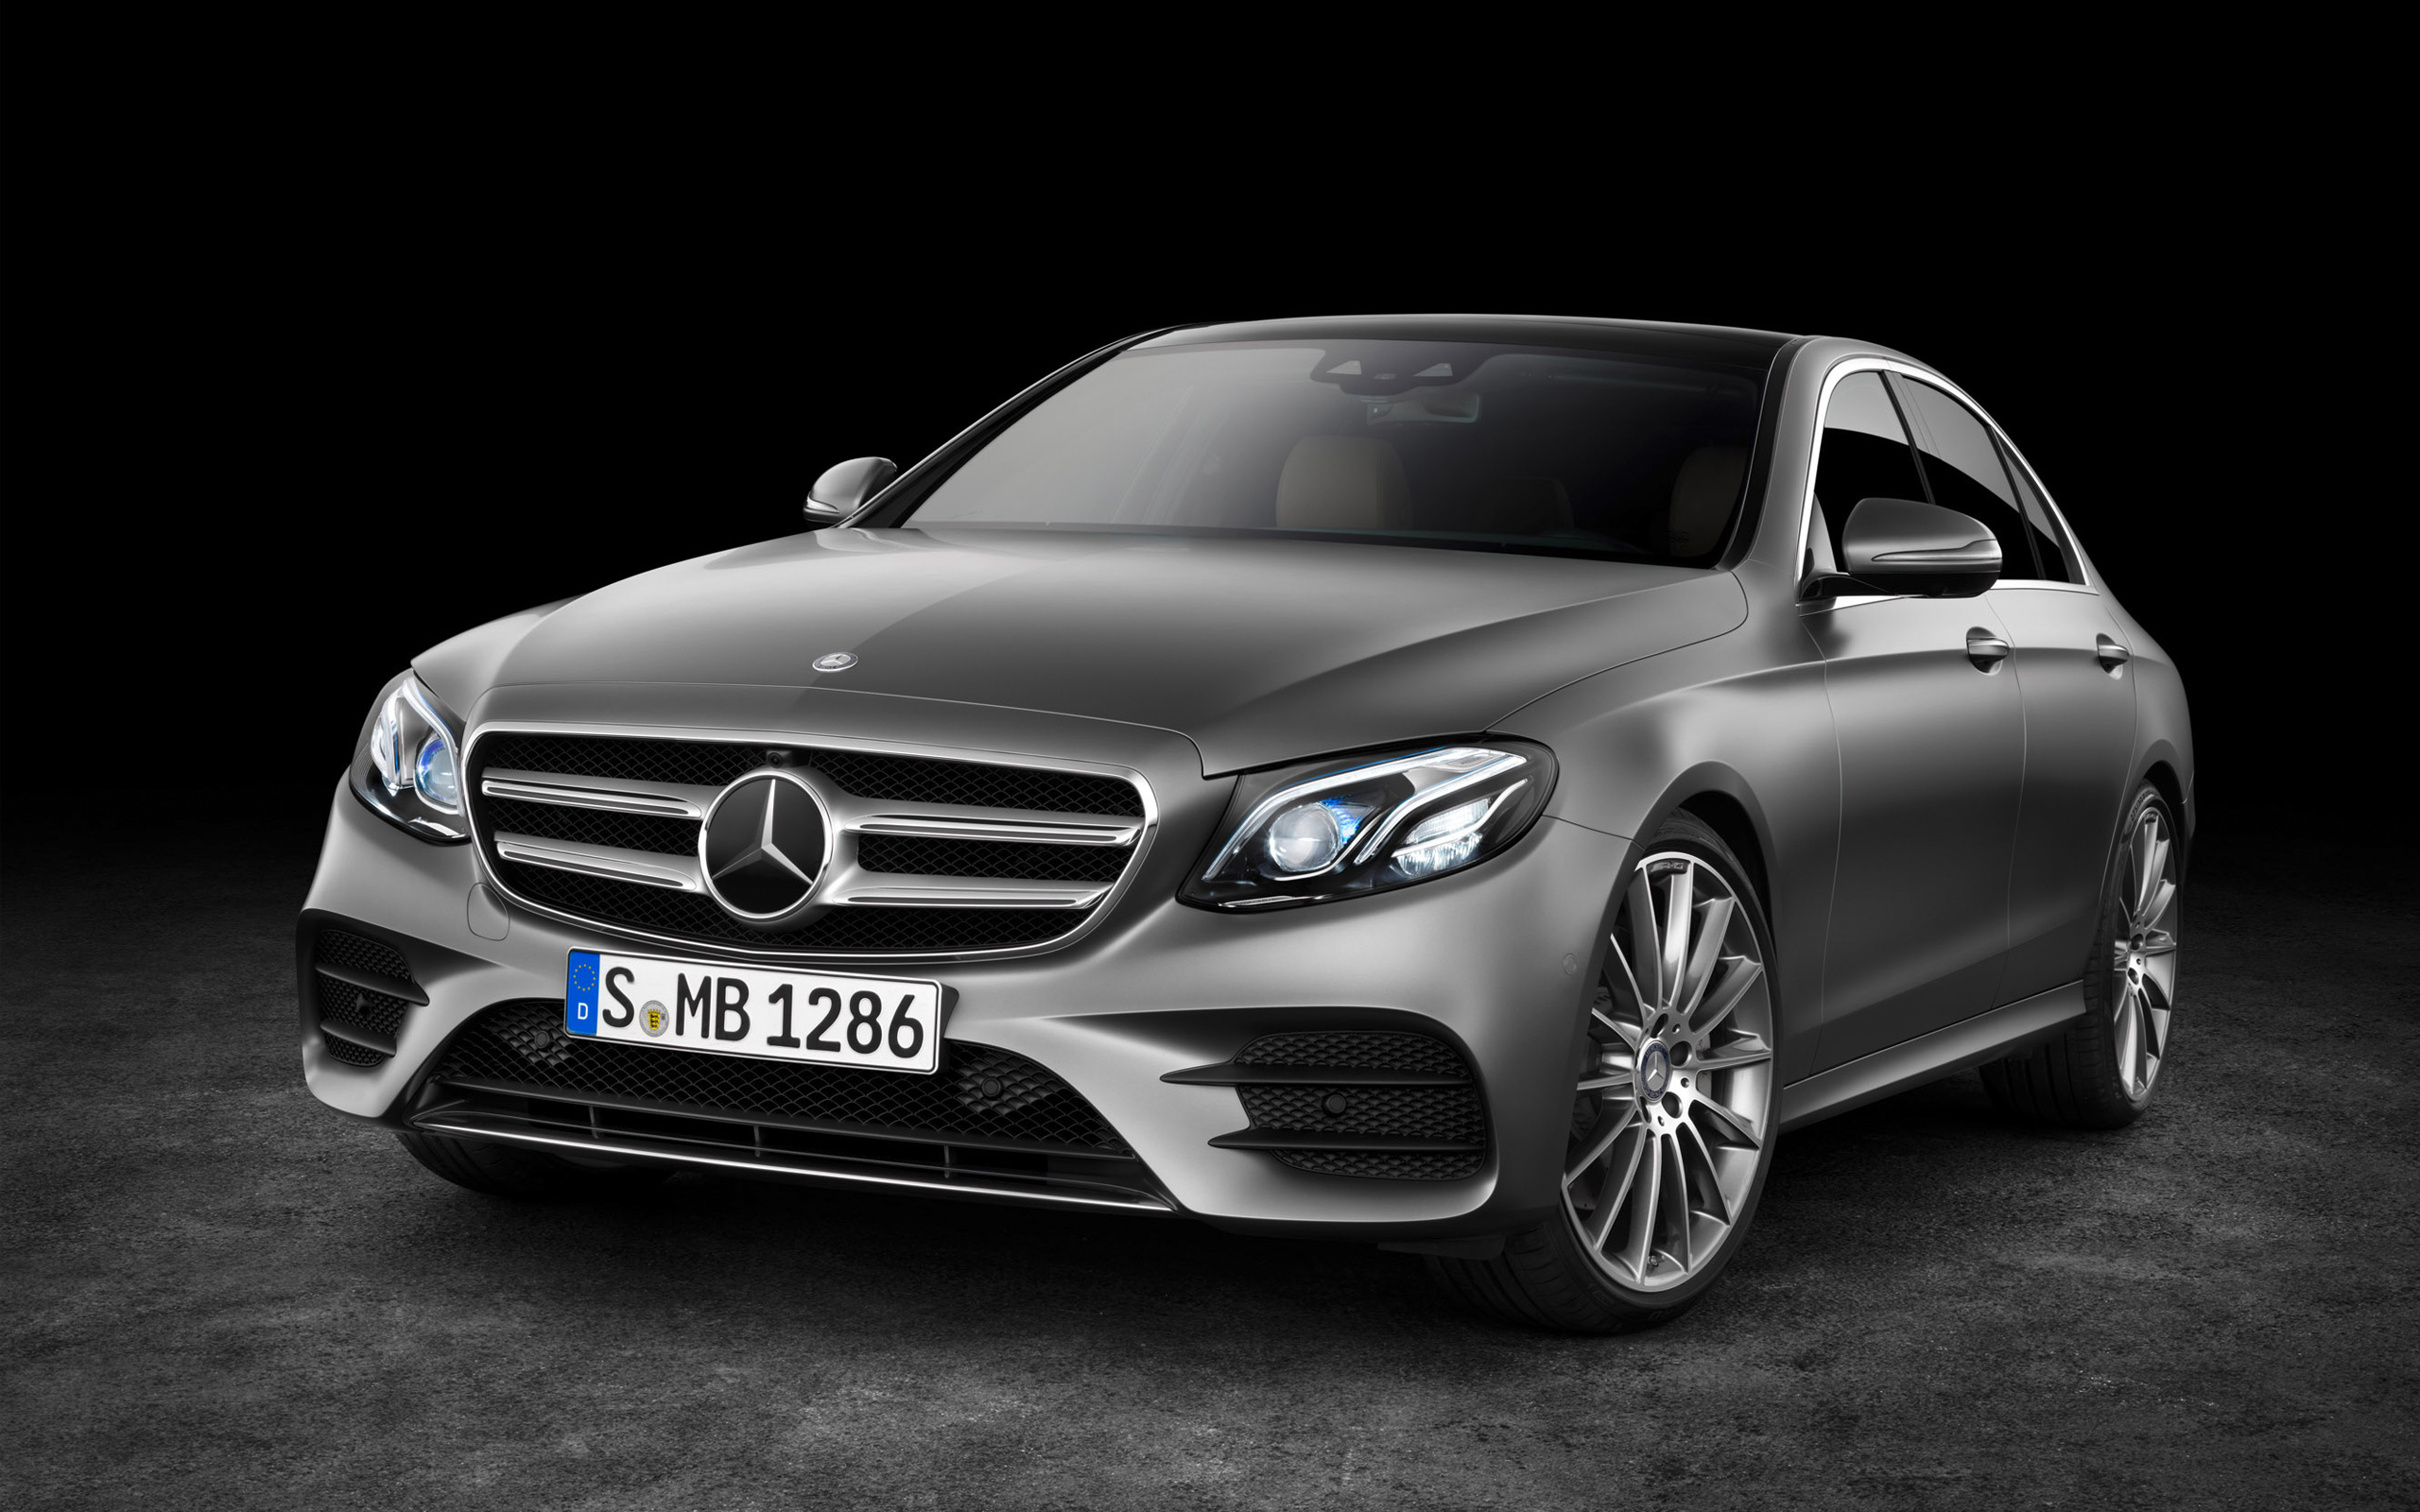 Mercedes Benz E Class Wallpaper And Background Image